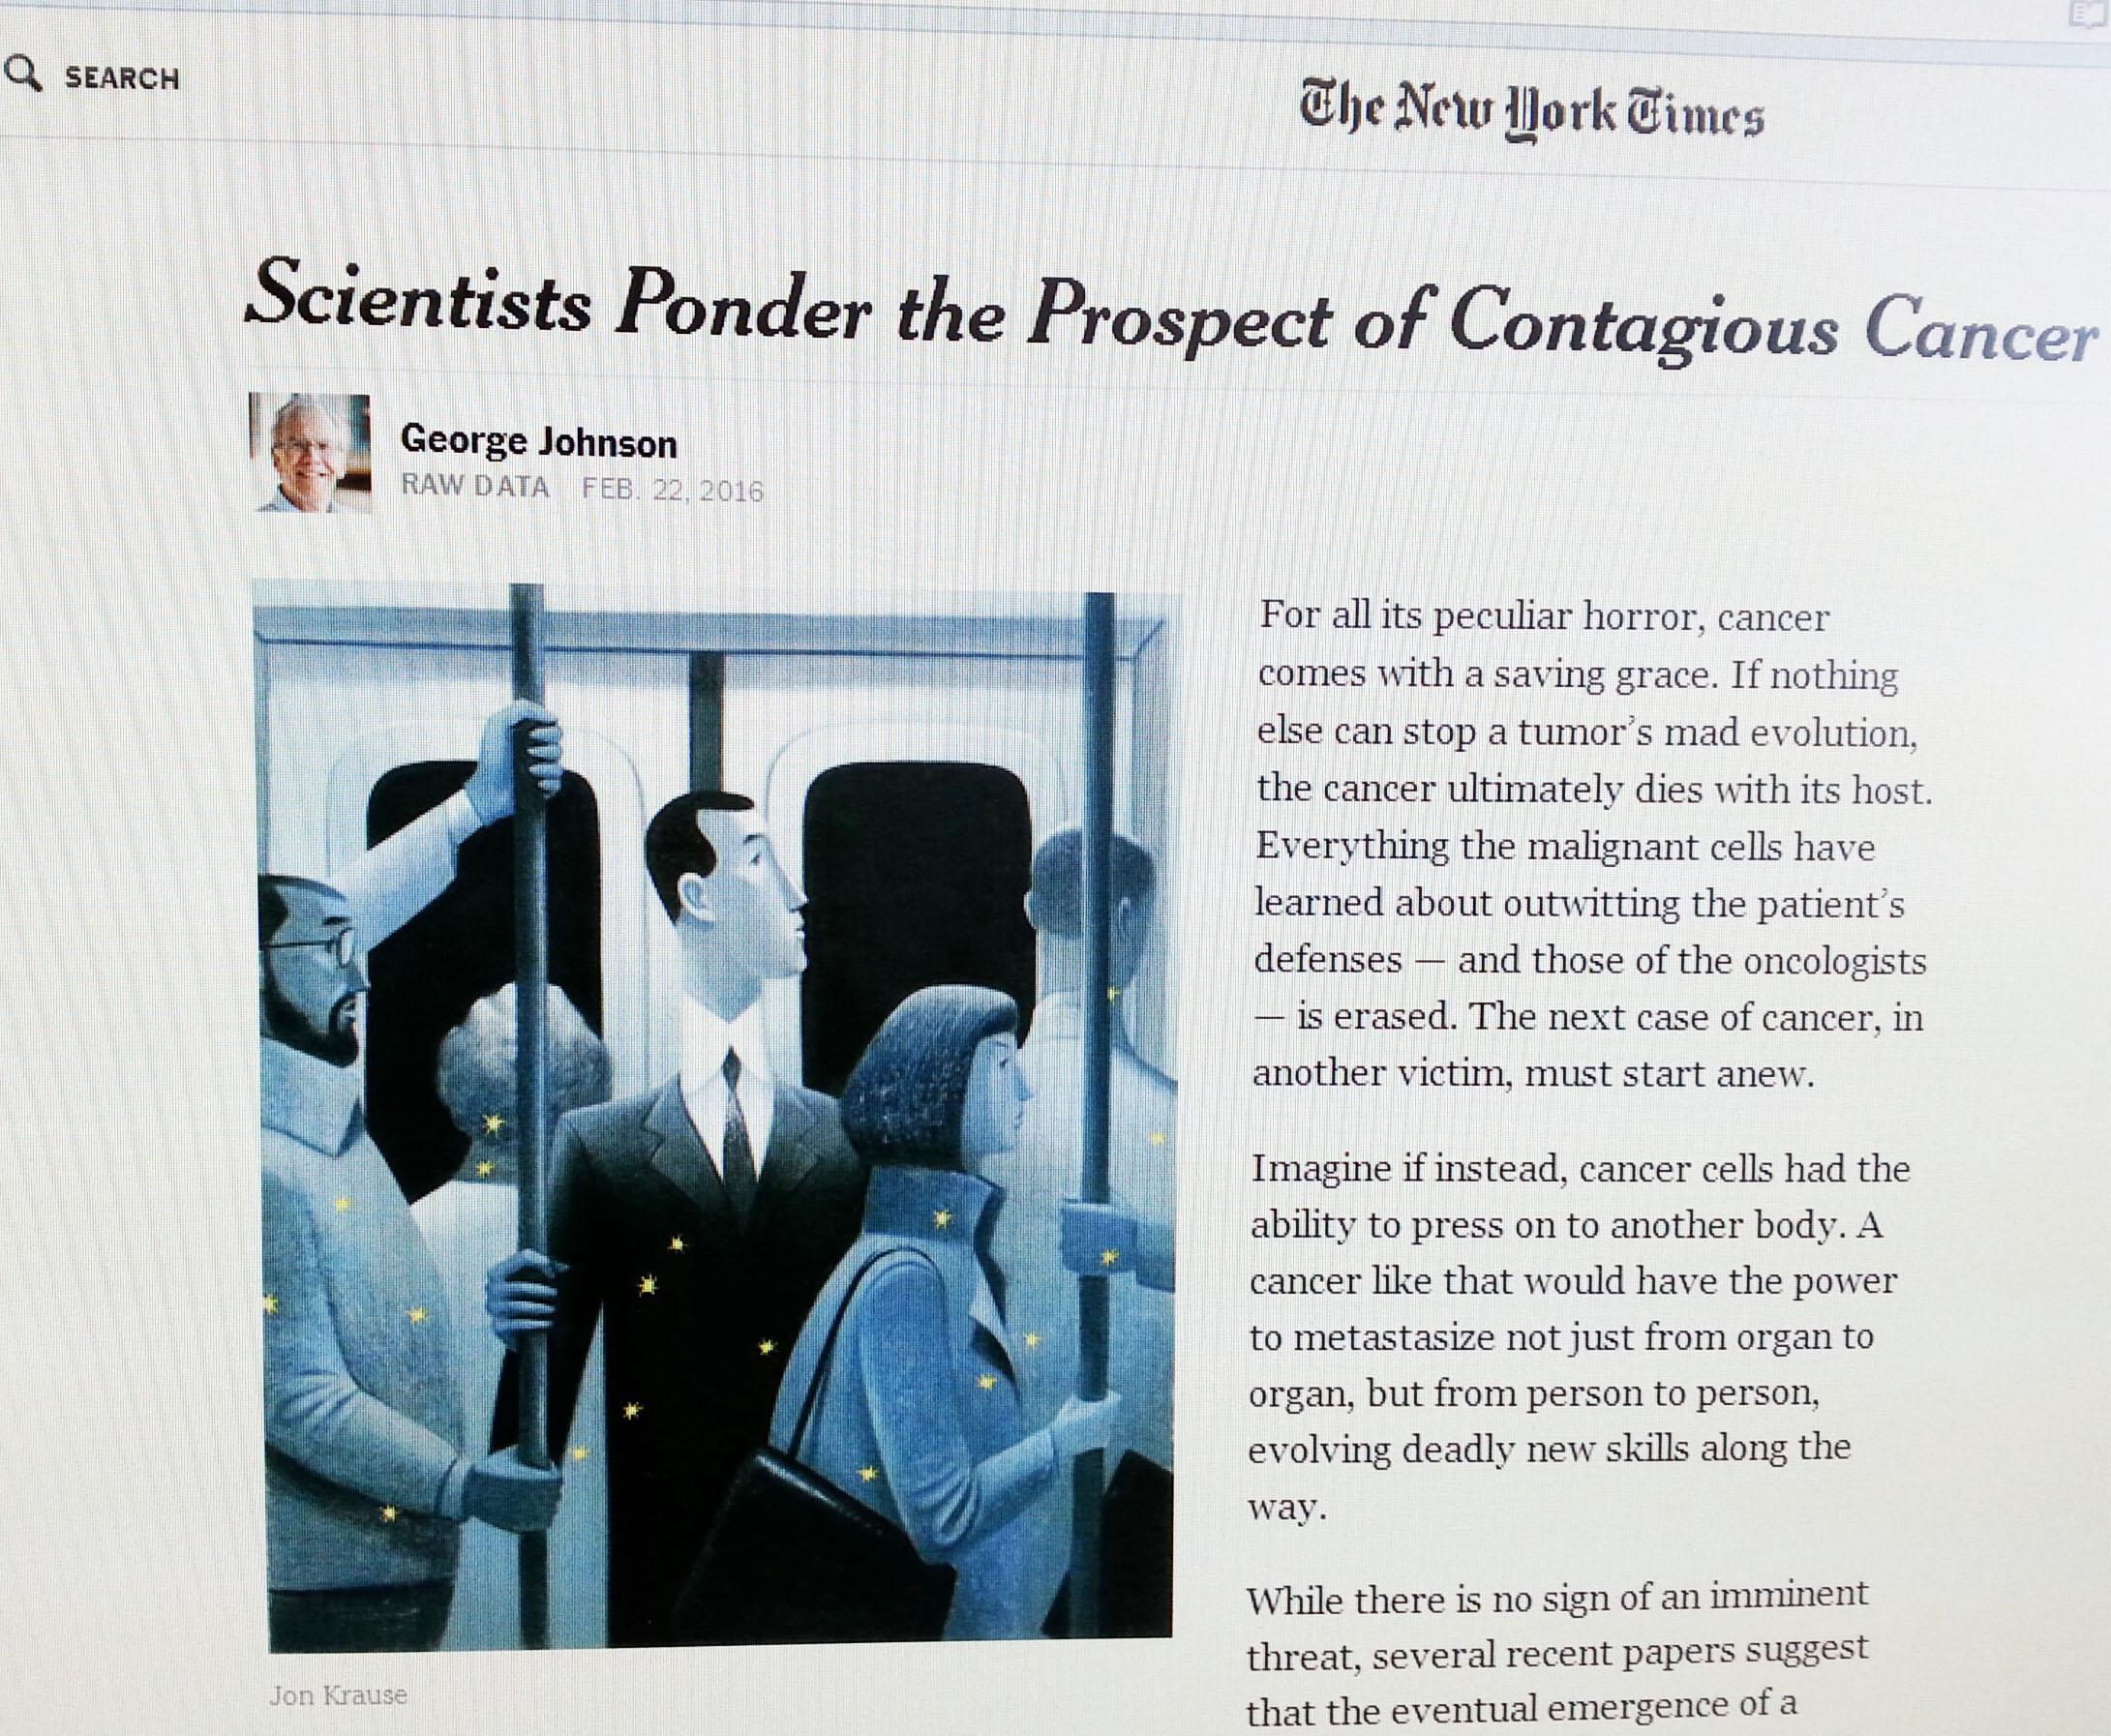 Transmissible cancers mentioned in the New York Times